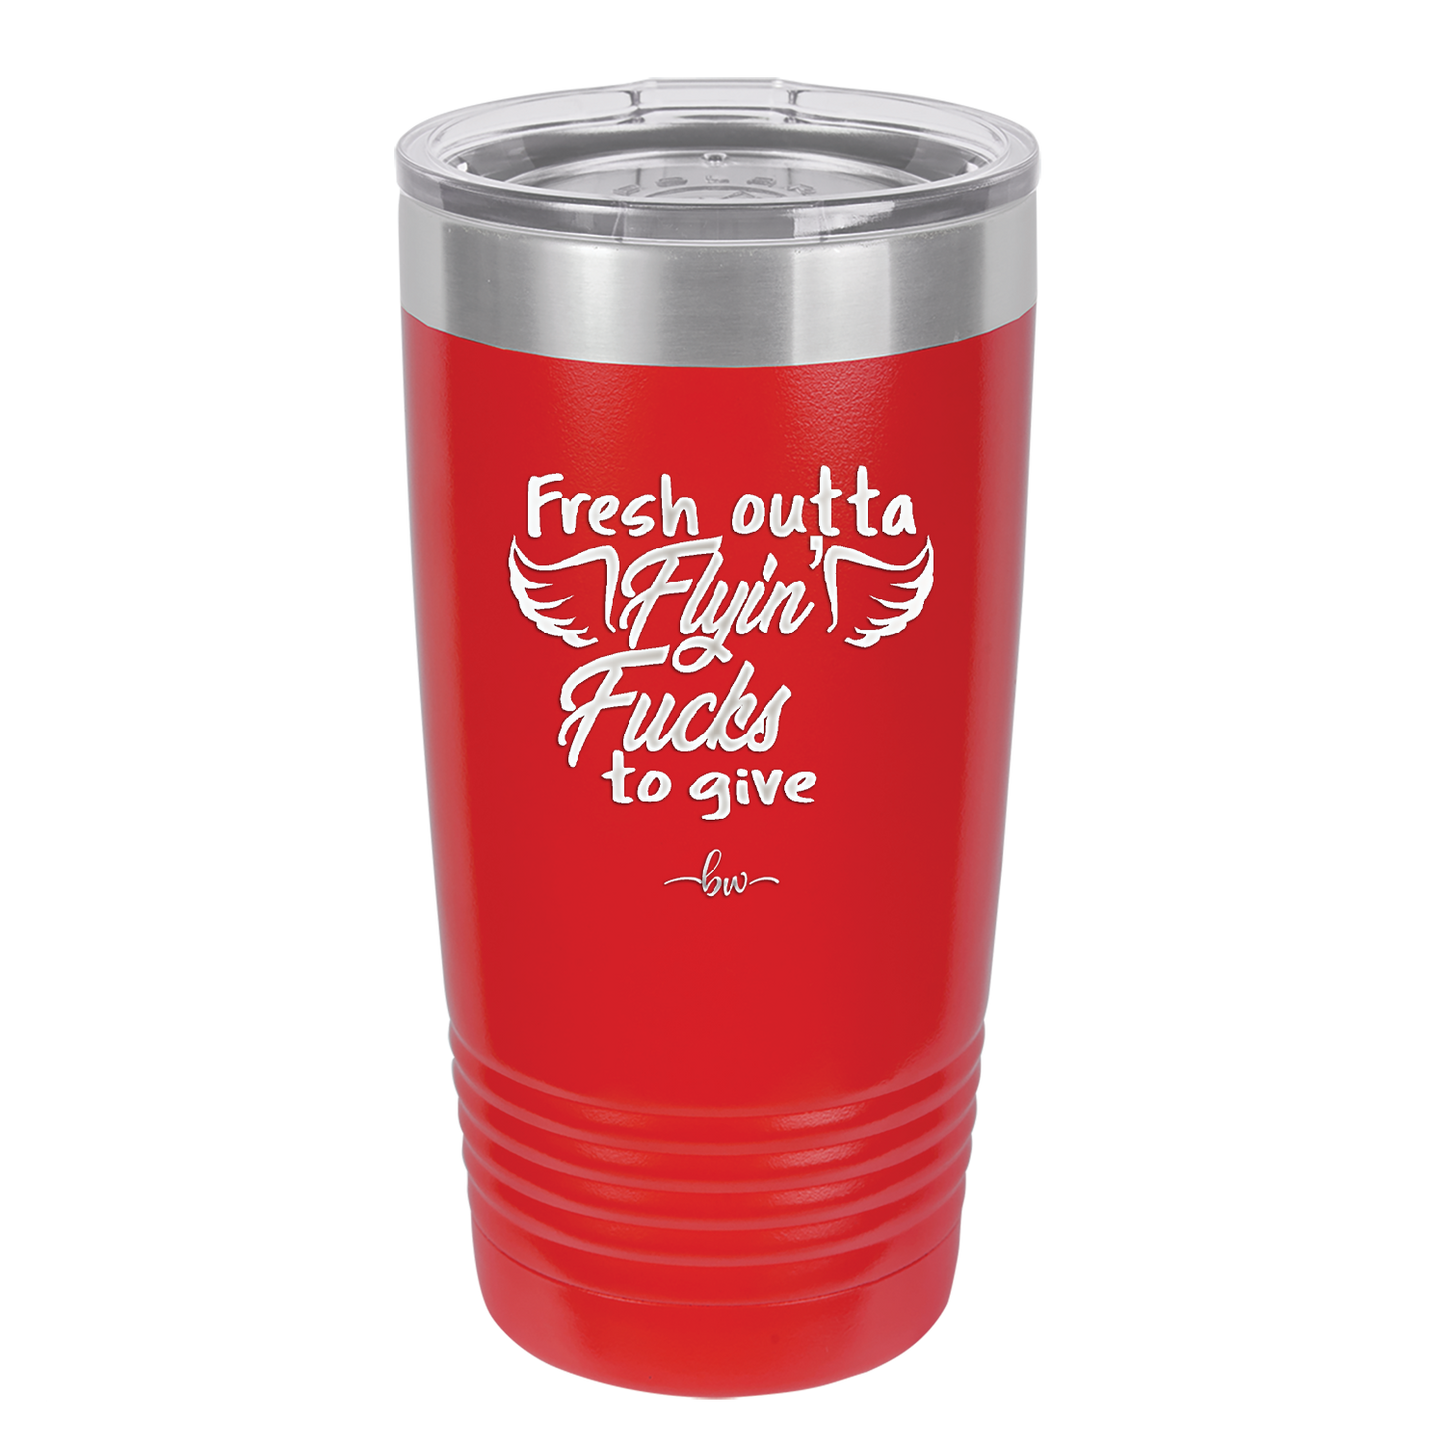 Fresh Outta Flying Fucks to Give  - Laser Engraved Stainless Steel Drinkware - 1322 -